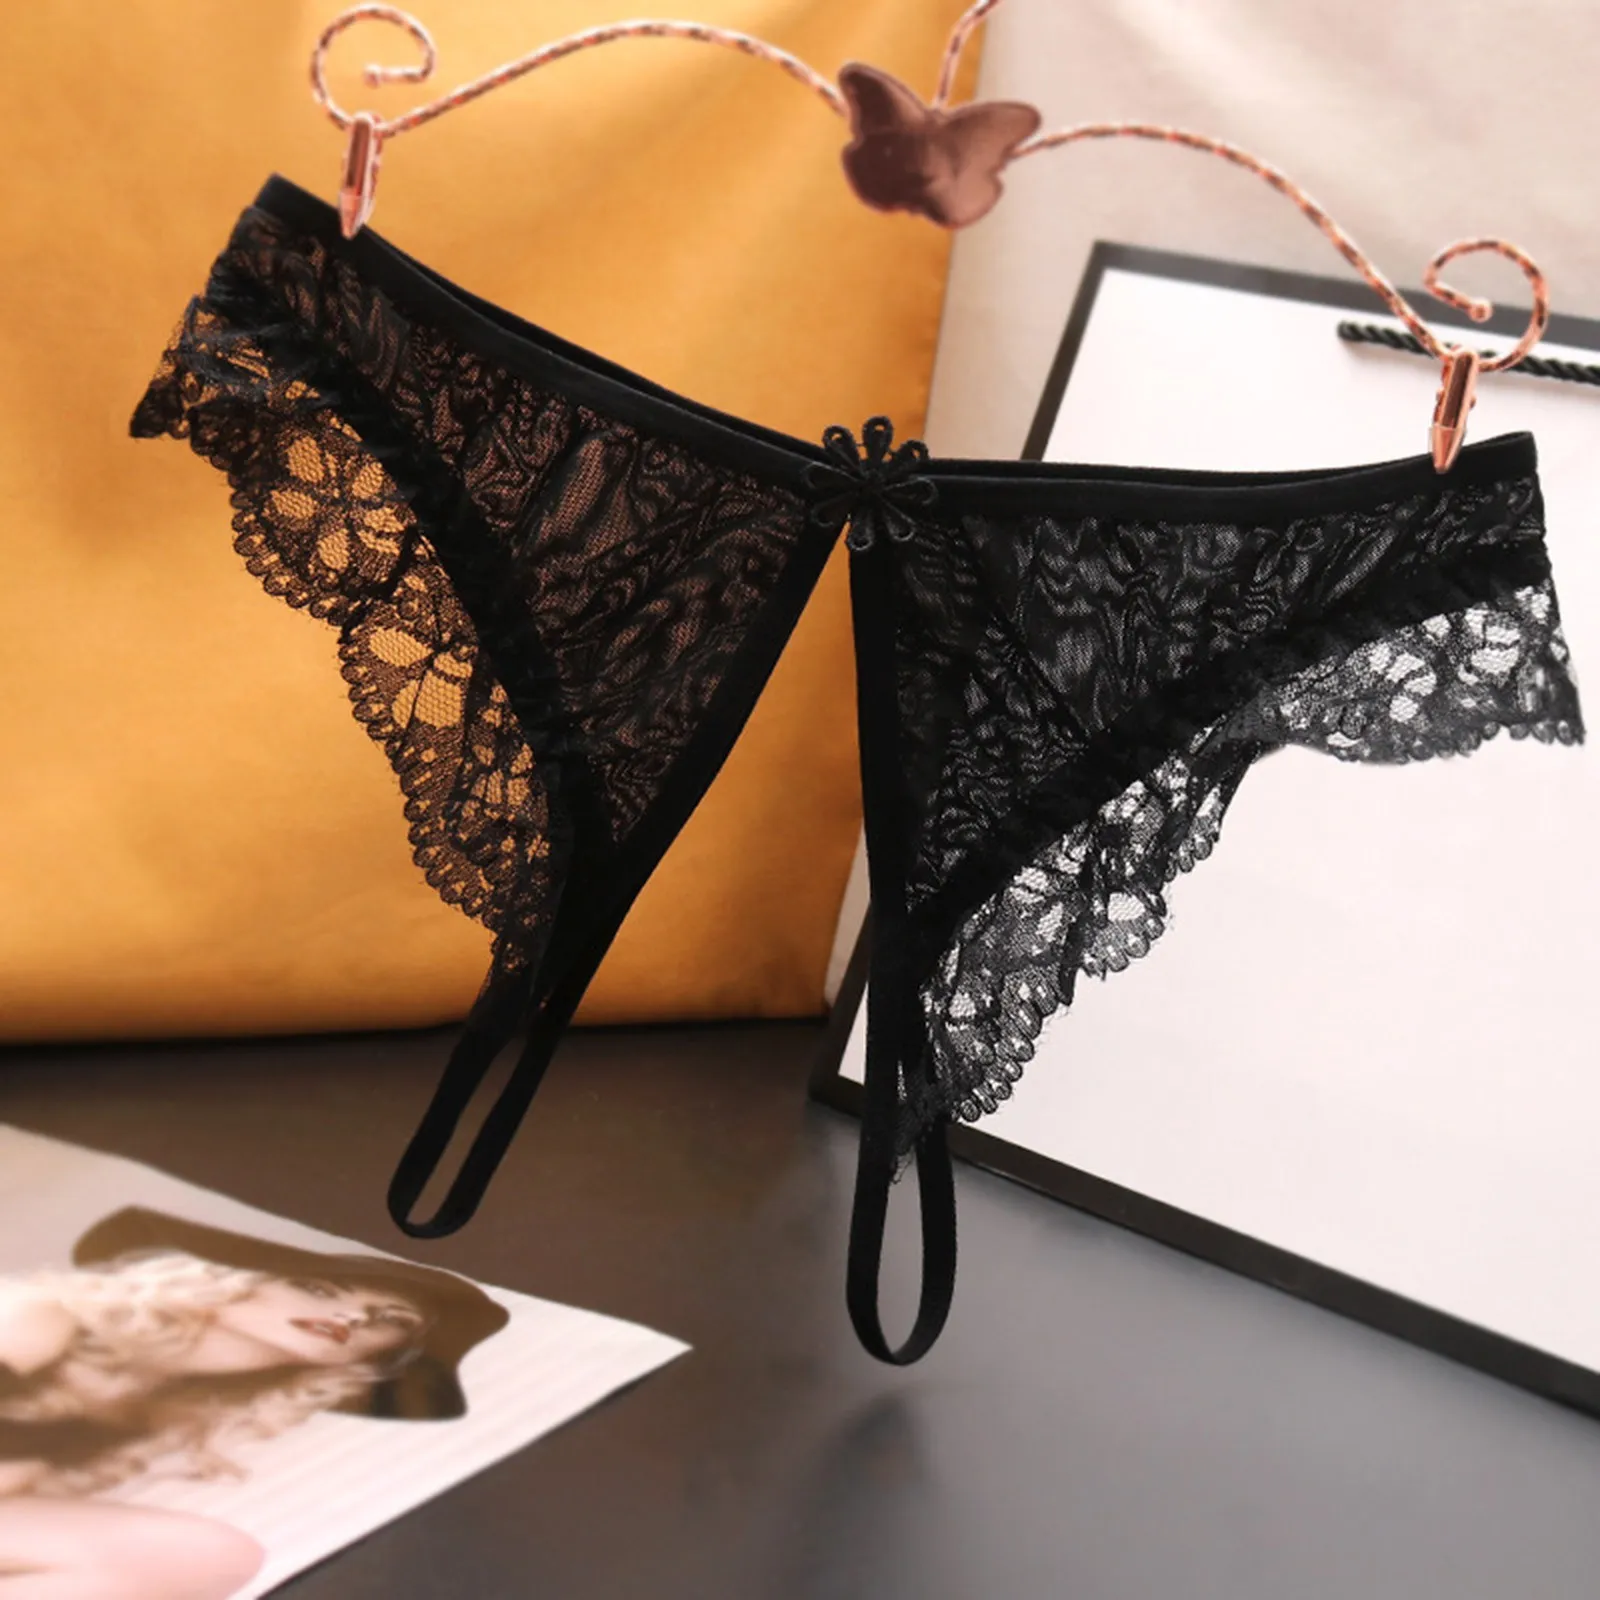 

Sexy Porno Crotchless Lingerie Women Thongs G strings Lace Panties Low-rise Open Crotch Briefs for Sex Transparent Underwear